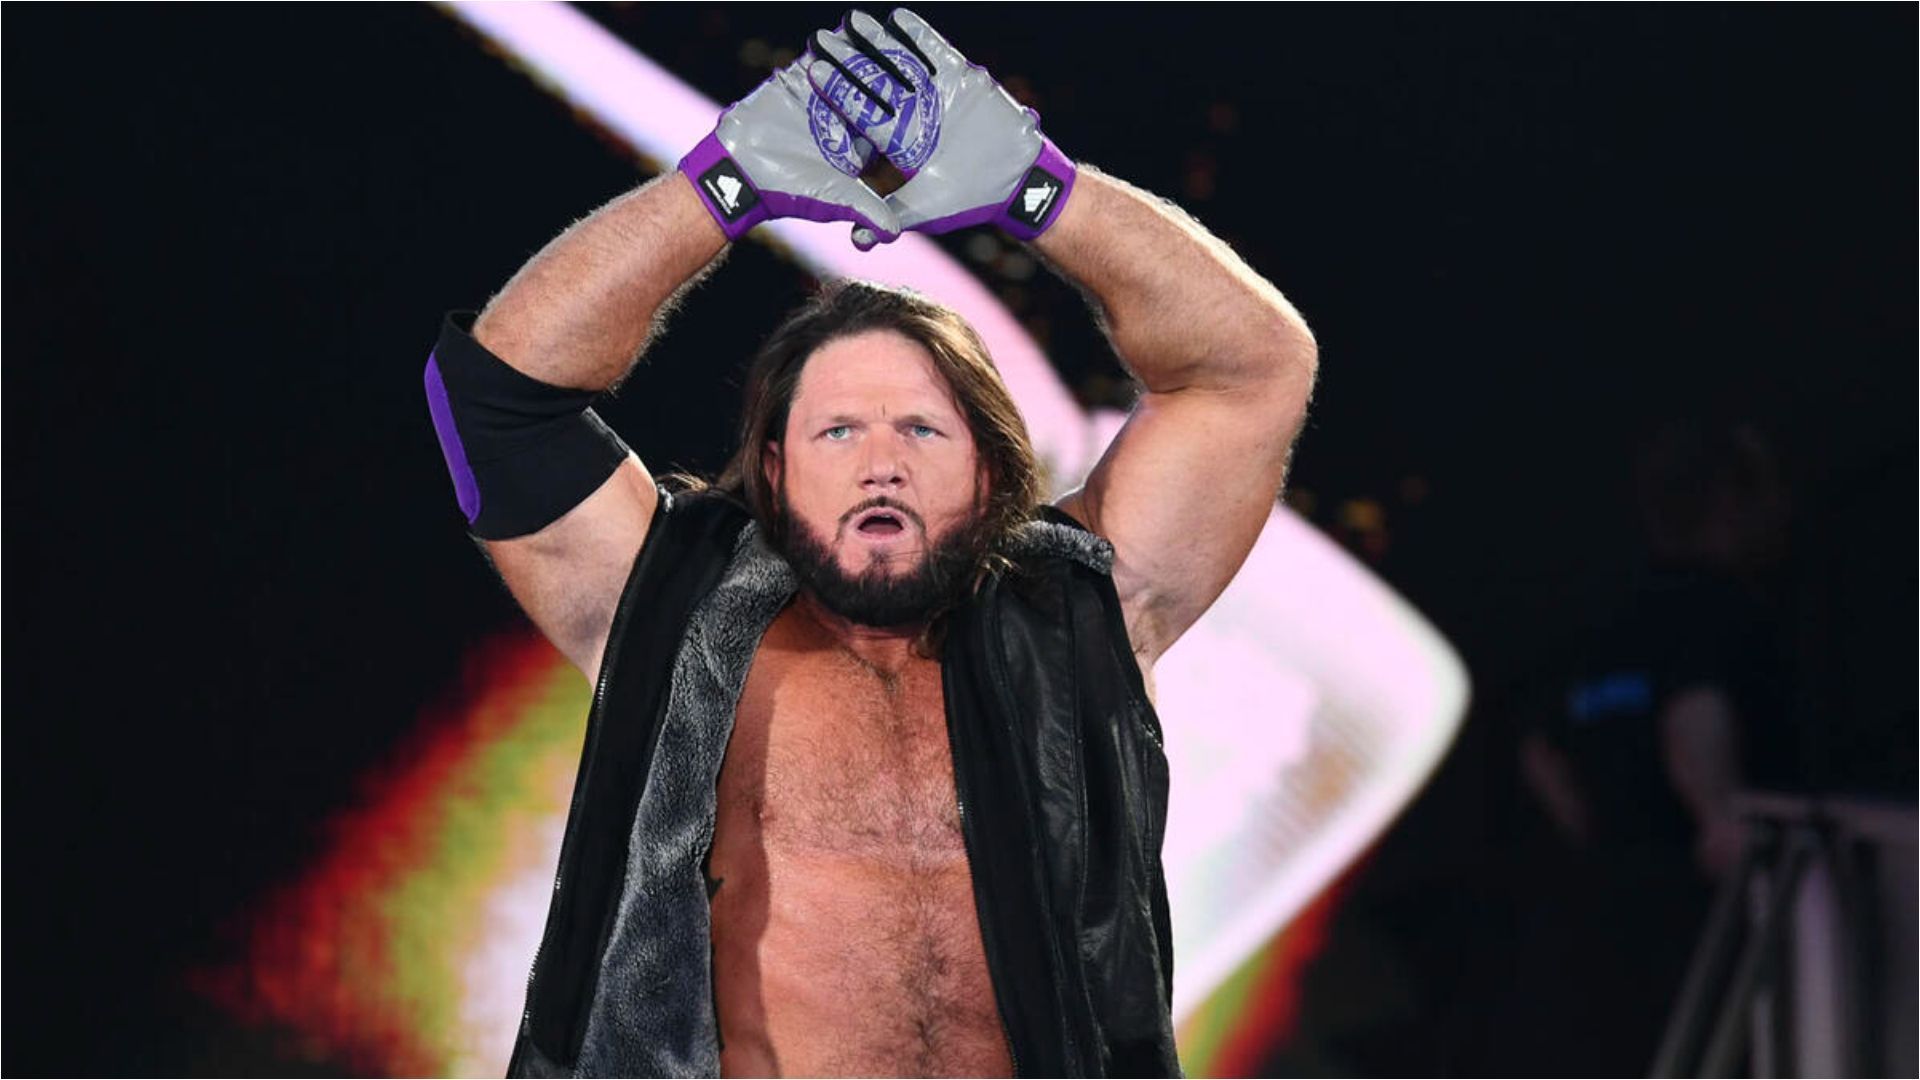 The Phenomenal One has been on a desperate title hunt [Image courtesy of WWE.com]